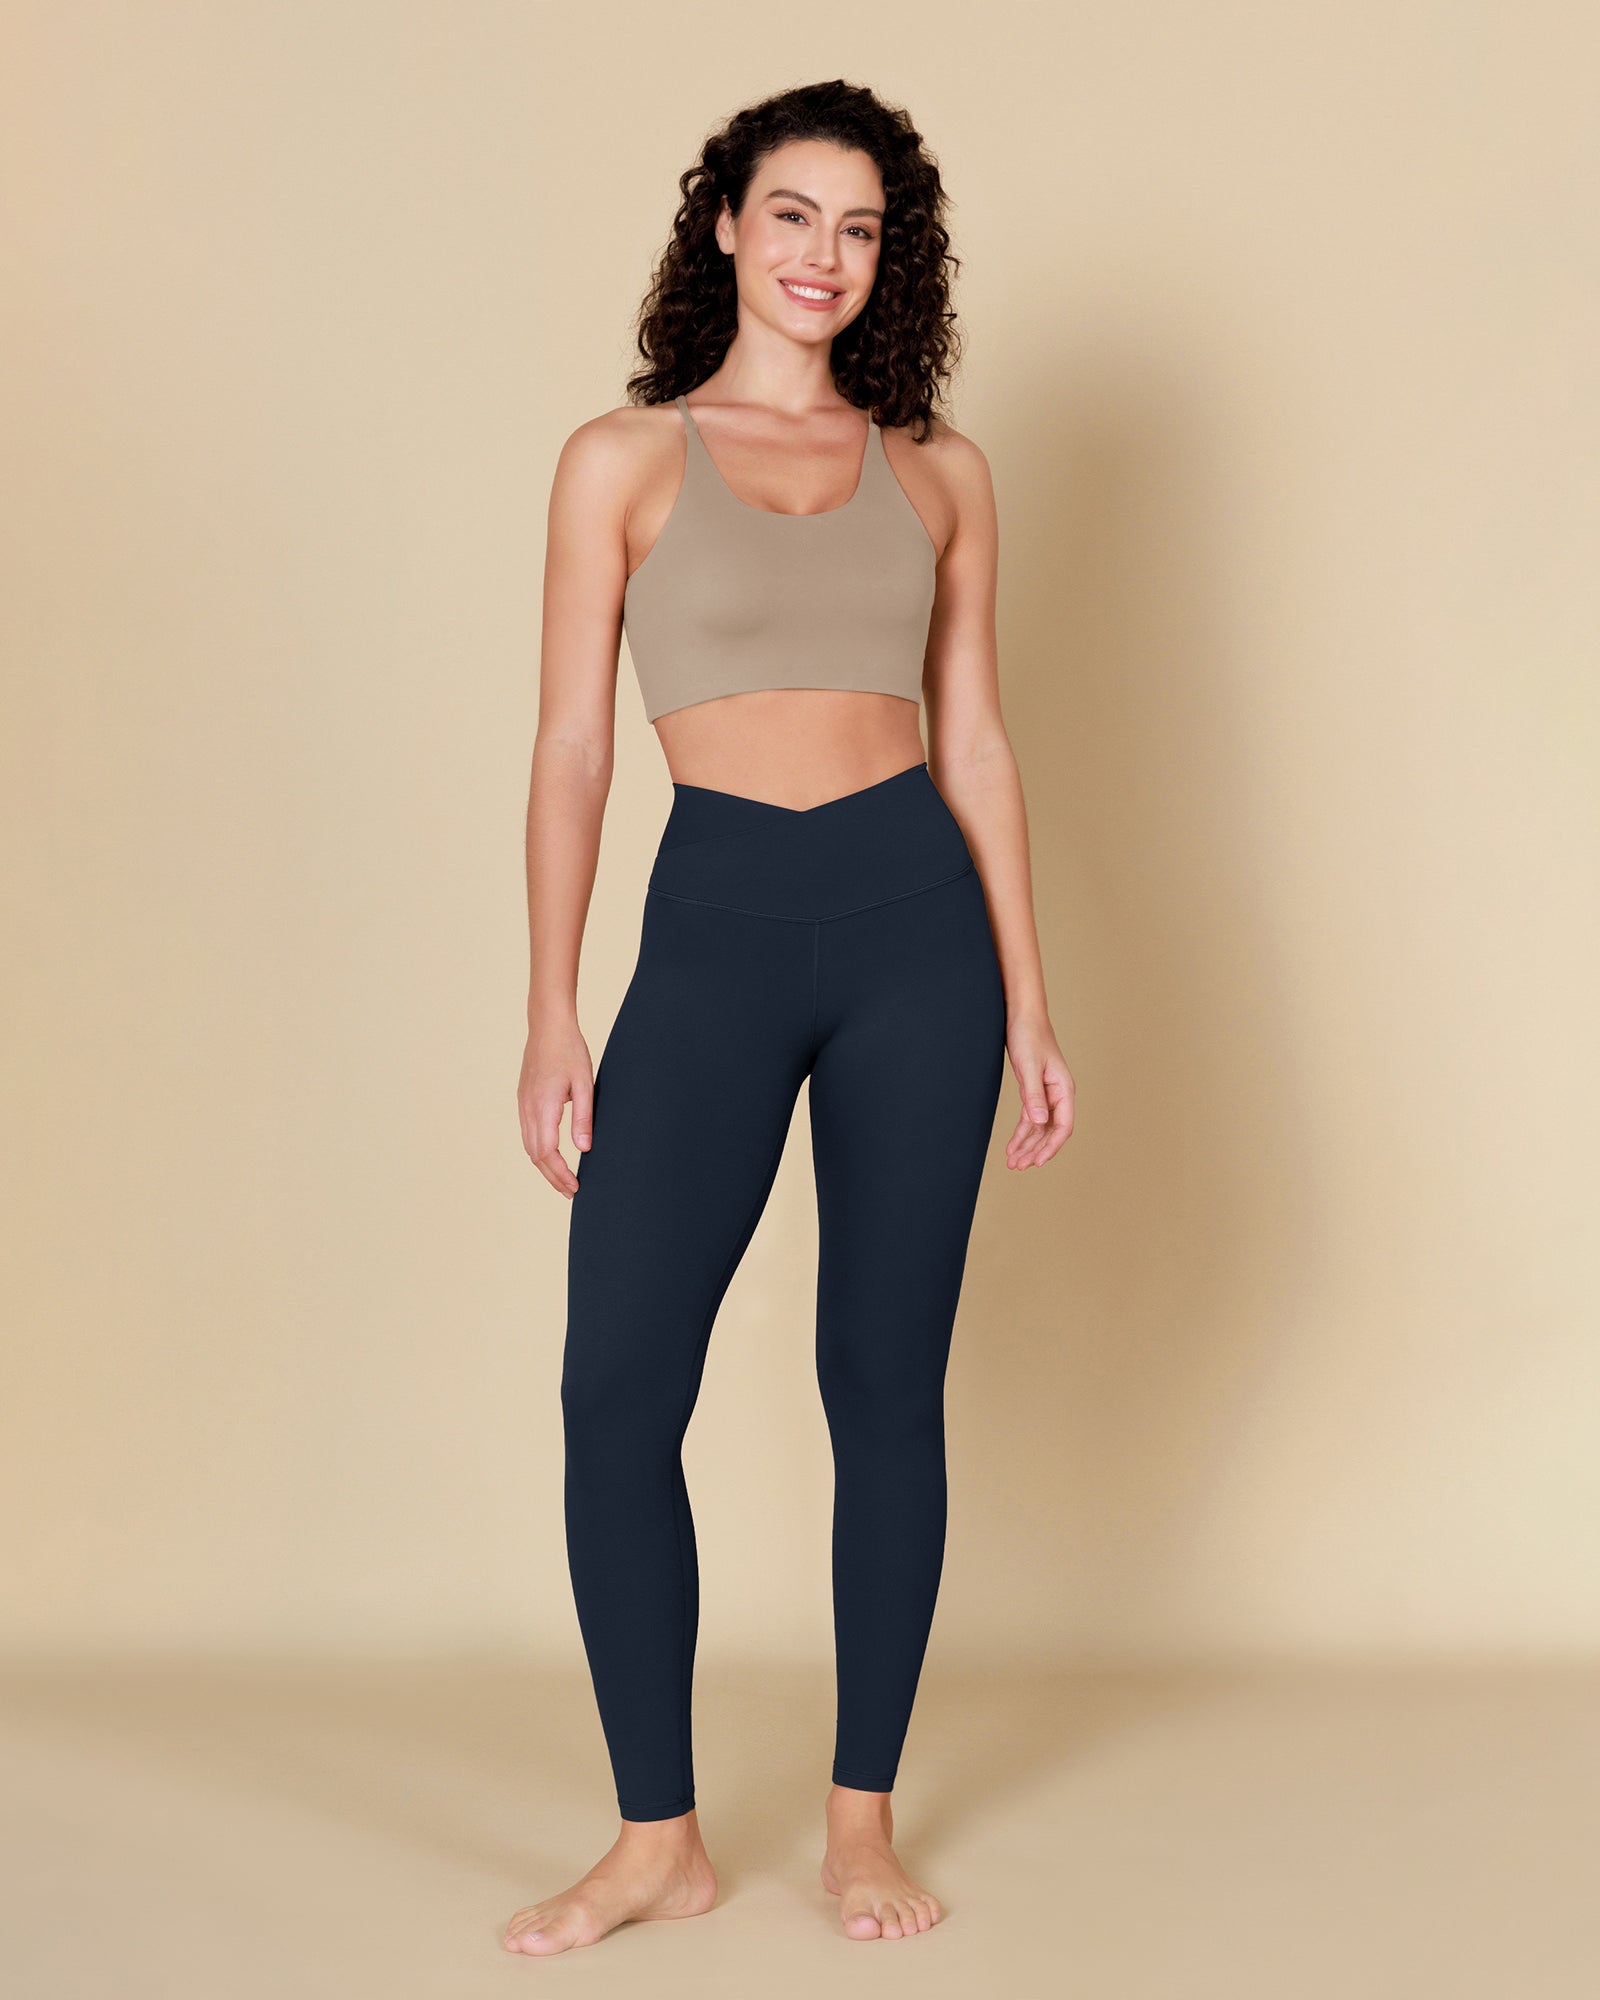 ODCLOUD Crossover 28" Leggings with Back Pocket - Classic Colors Deep Navy - ododos